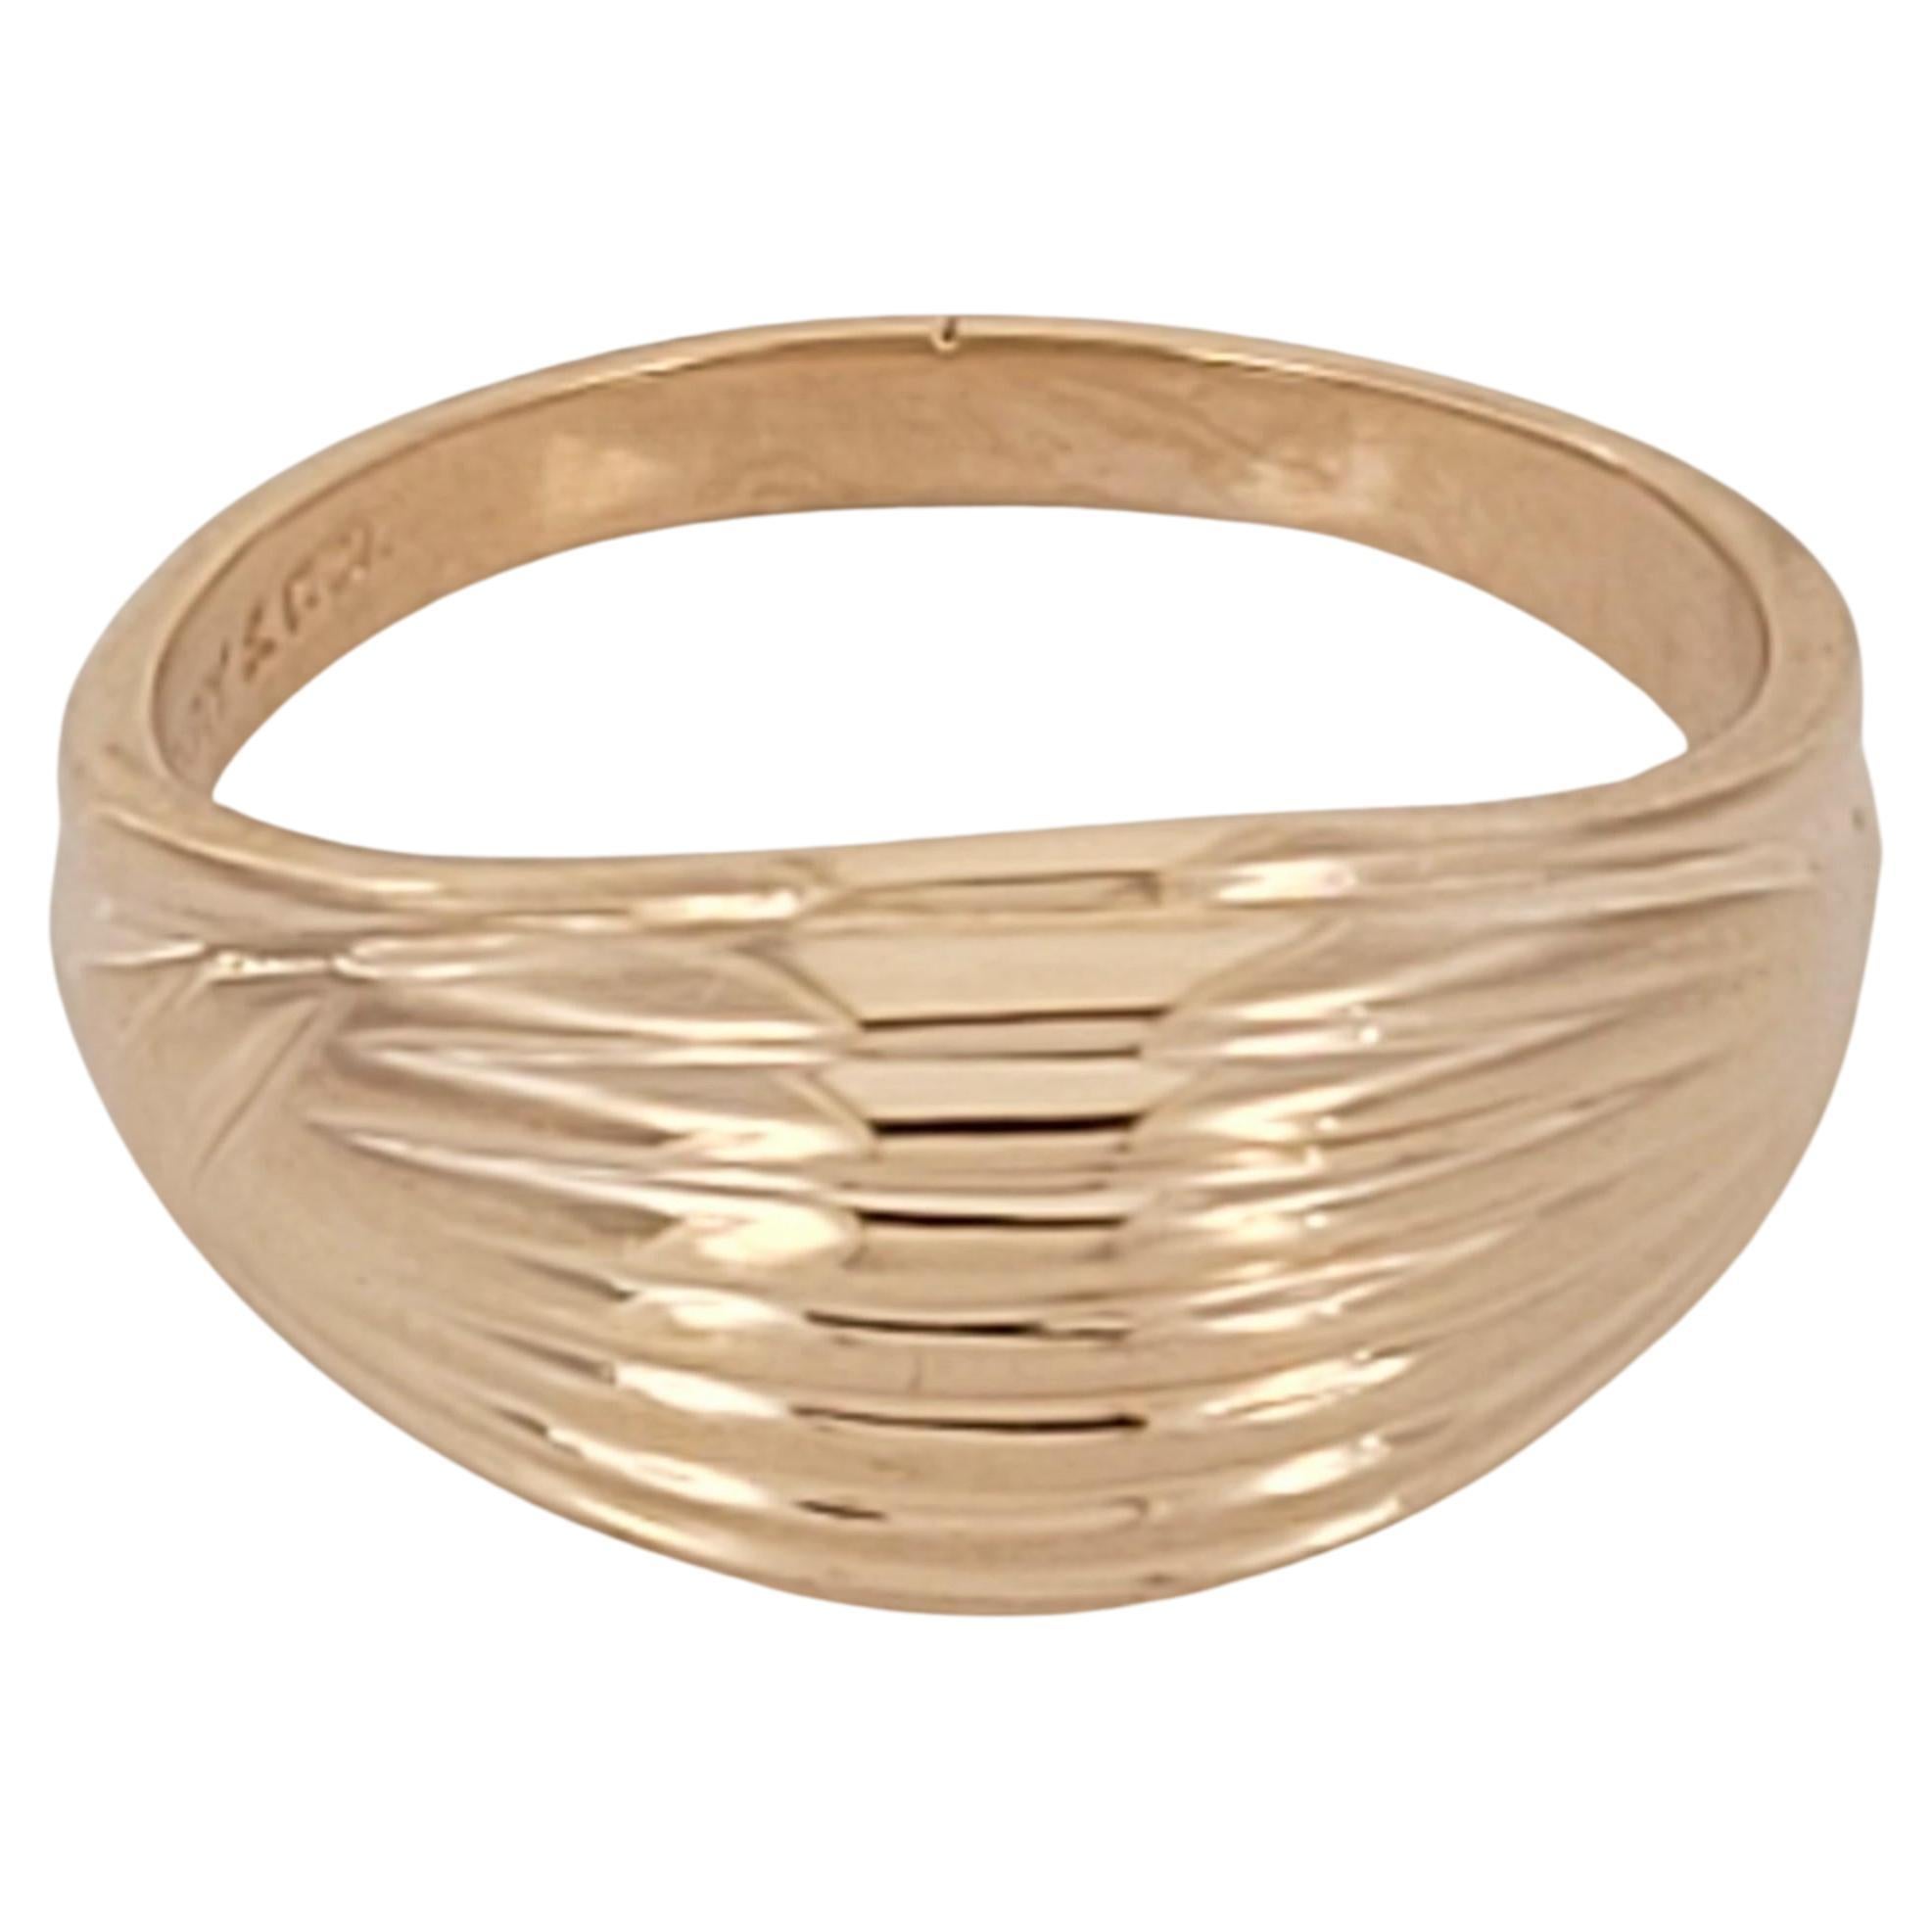 Vintage Tiffany & Co Pinky Ring in 14K Yellow Gold.